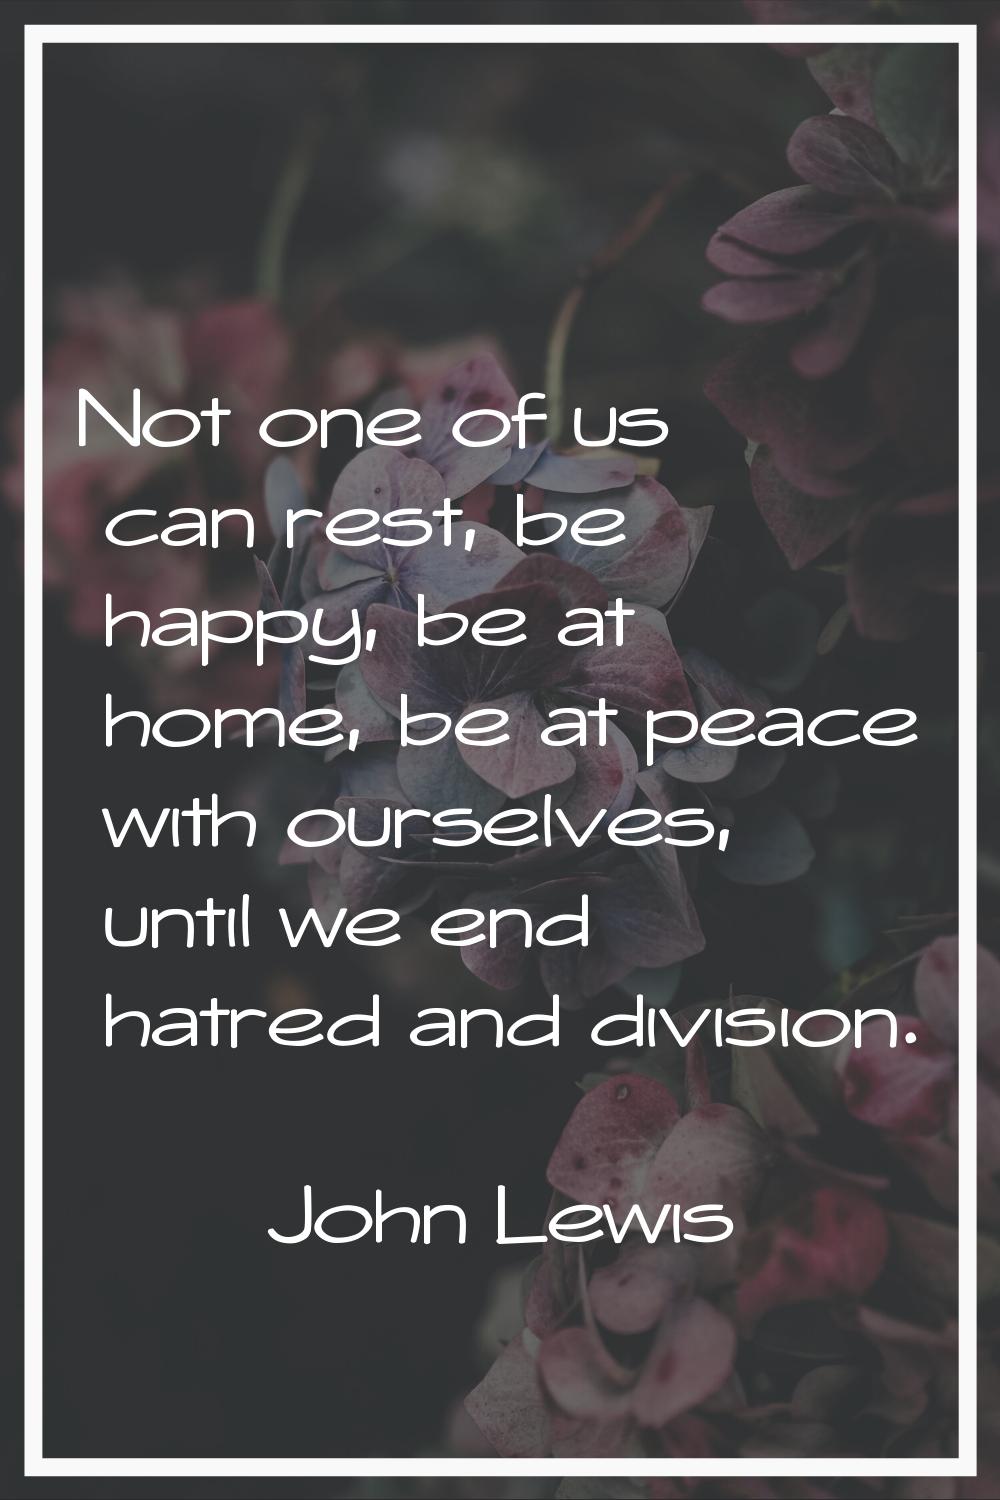 Not one of us can rest, be happy, be at home, be at peace with ourselves, until we end hatred and d